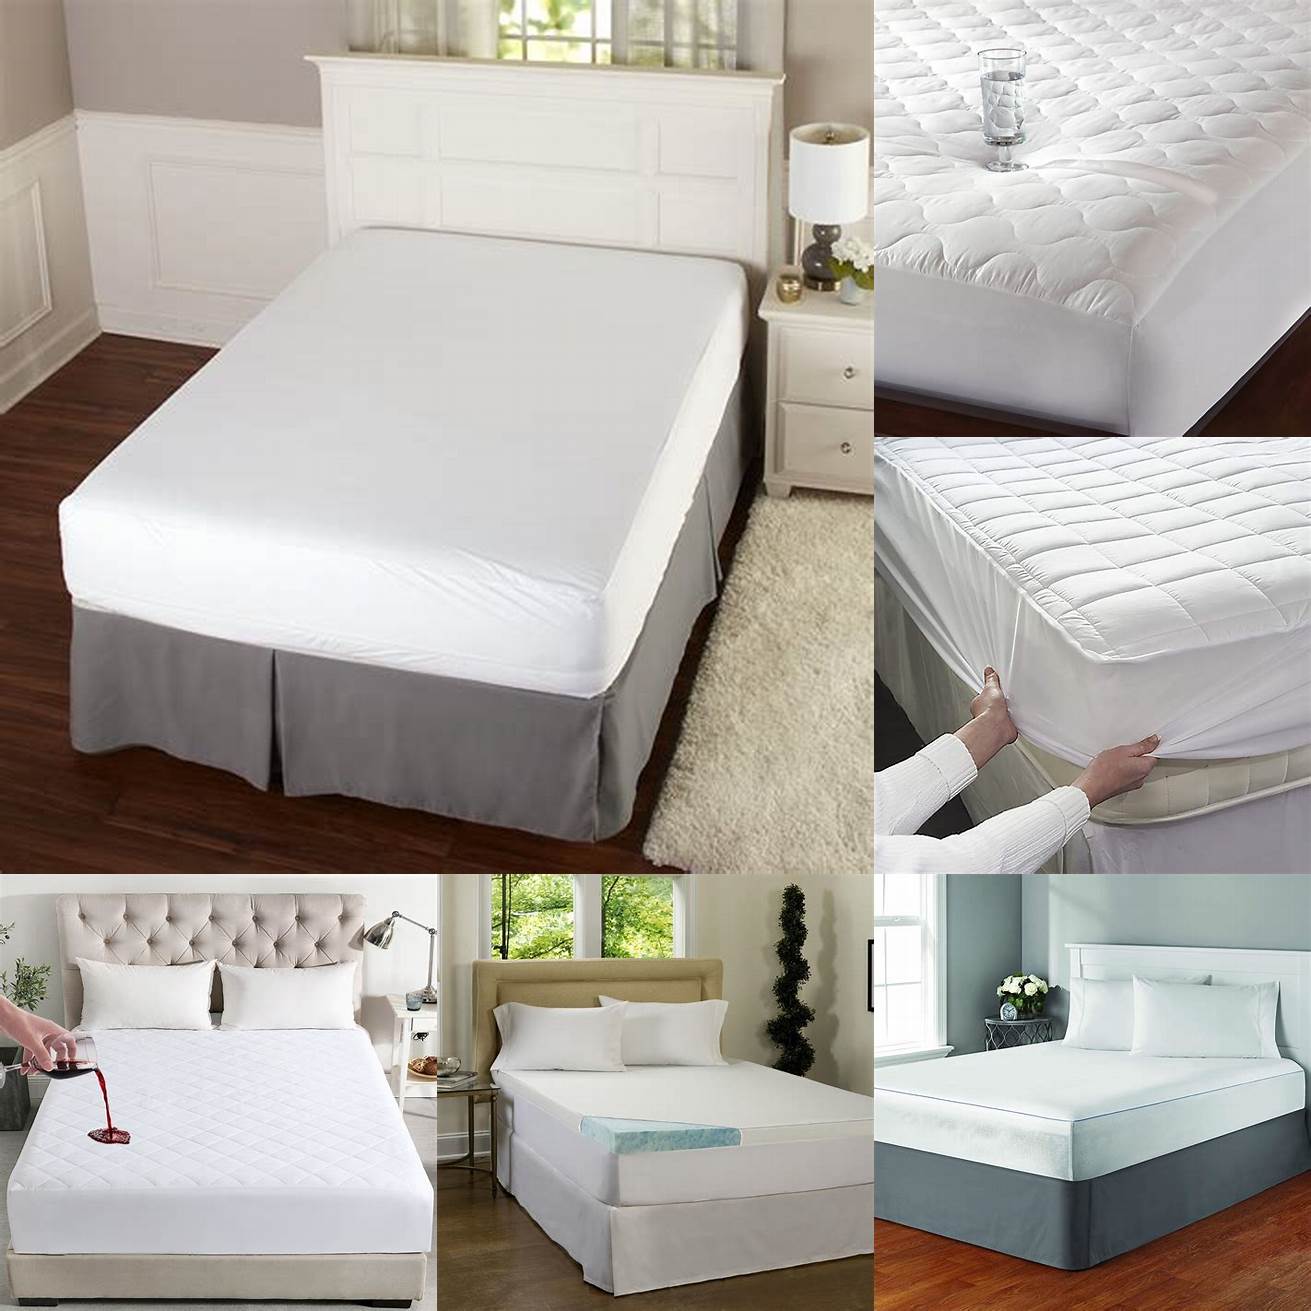 Picture of a mattress cover